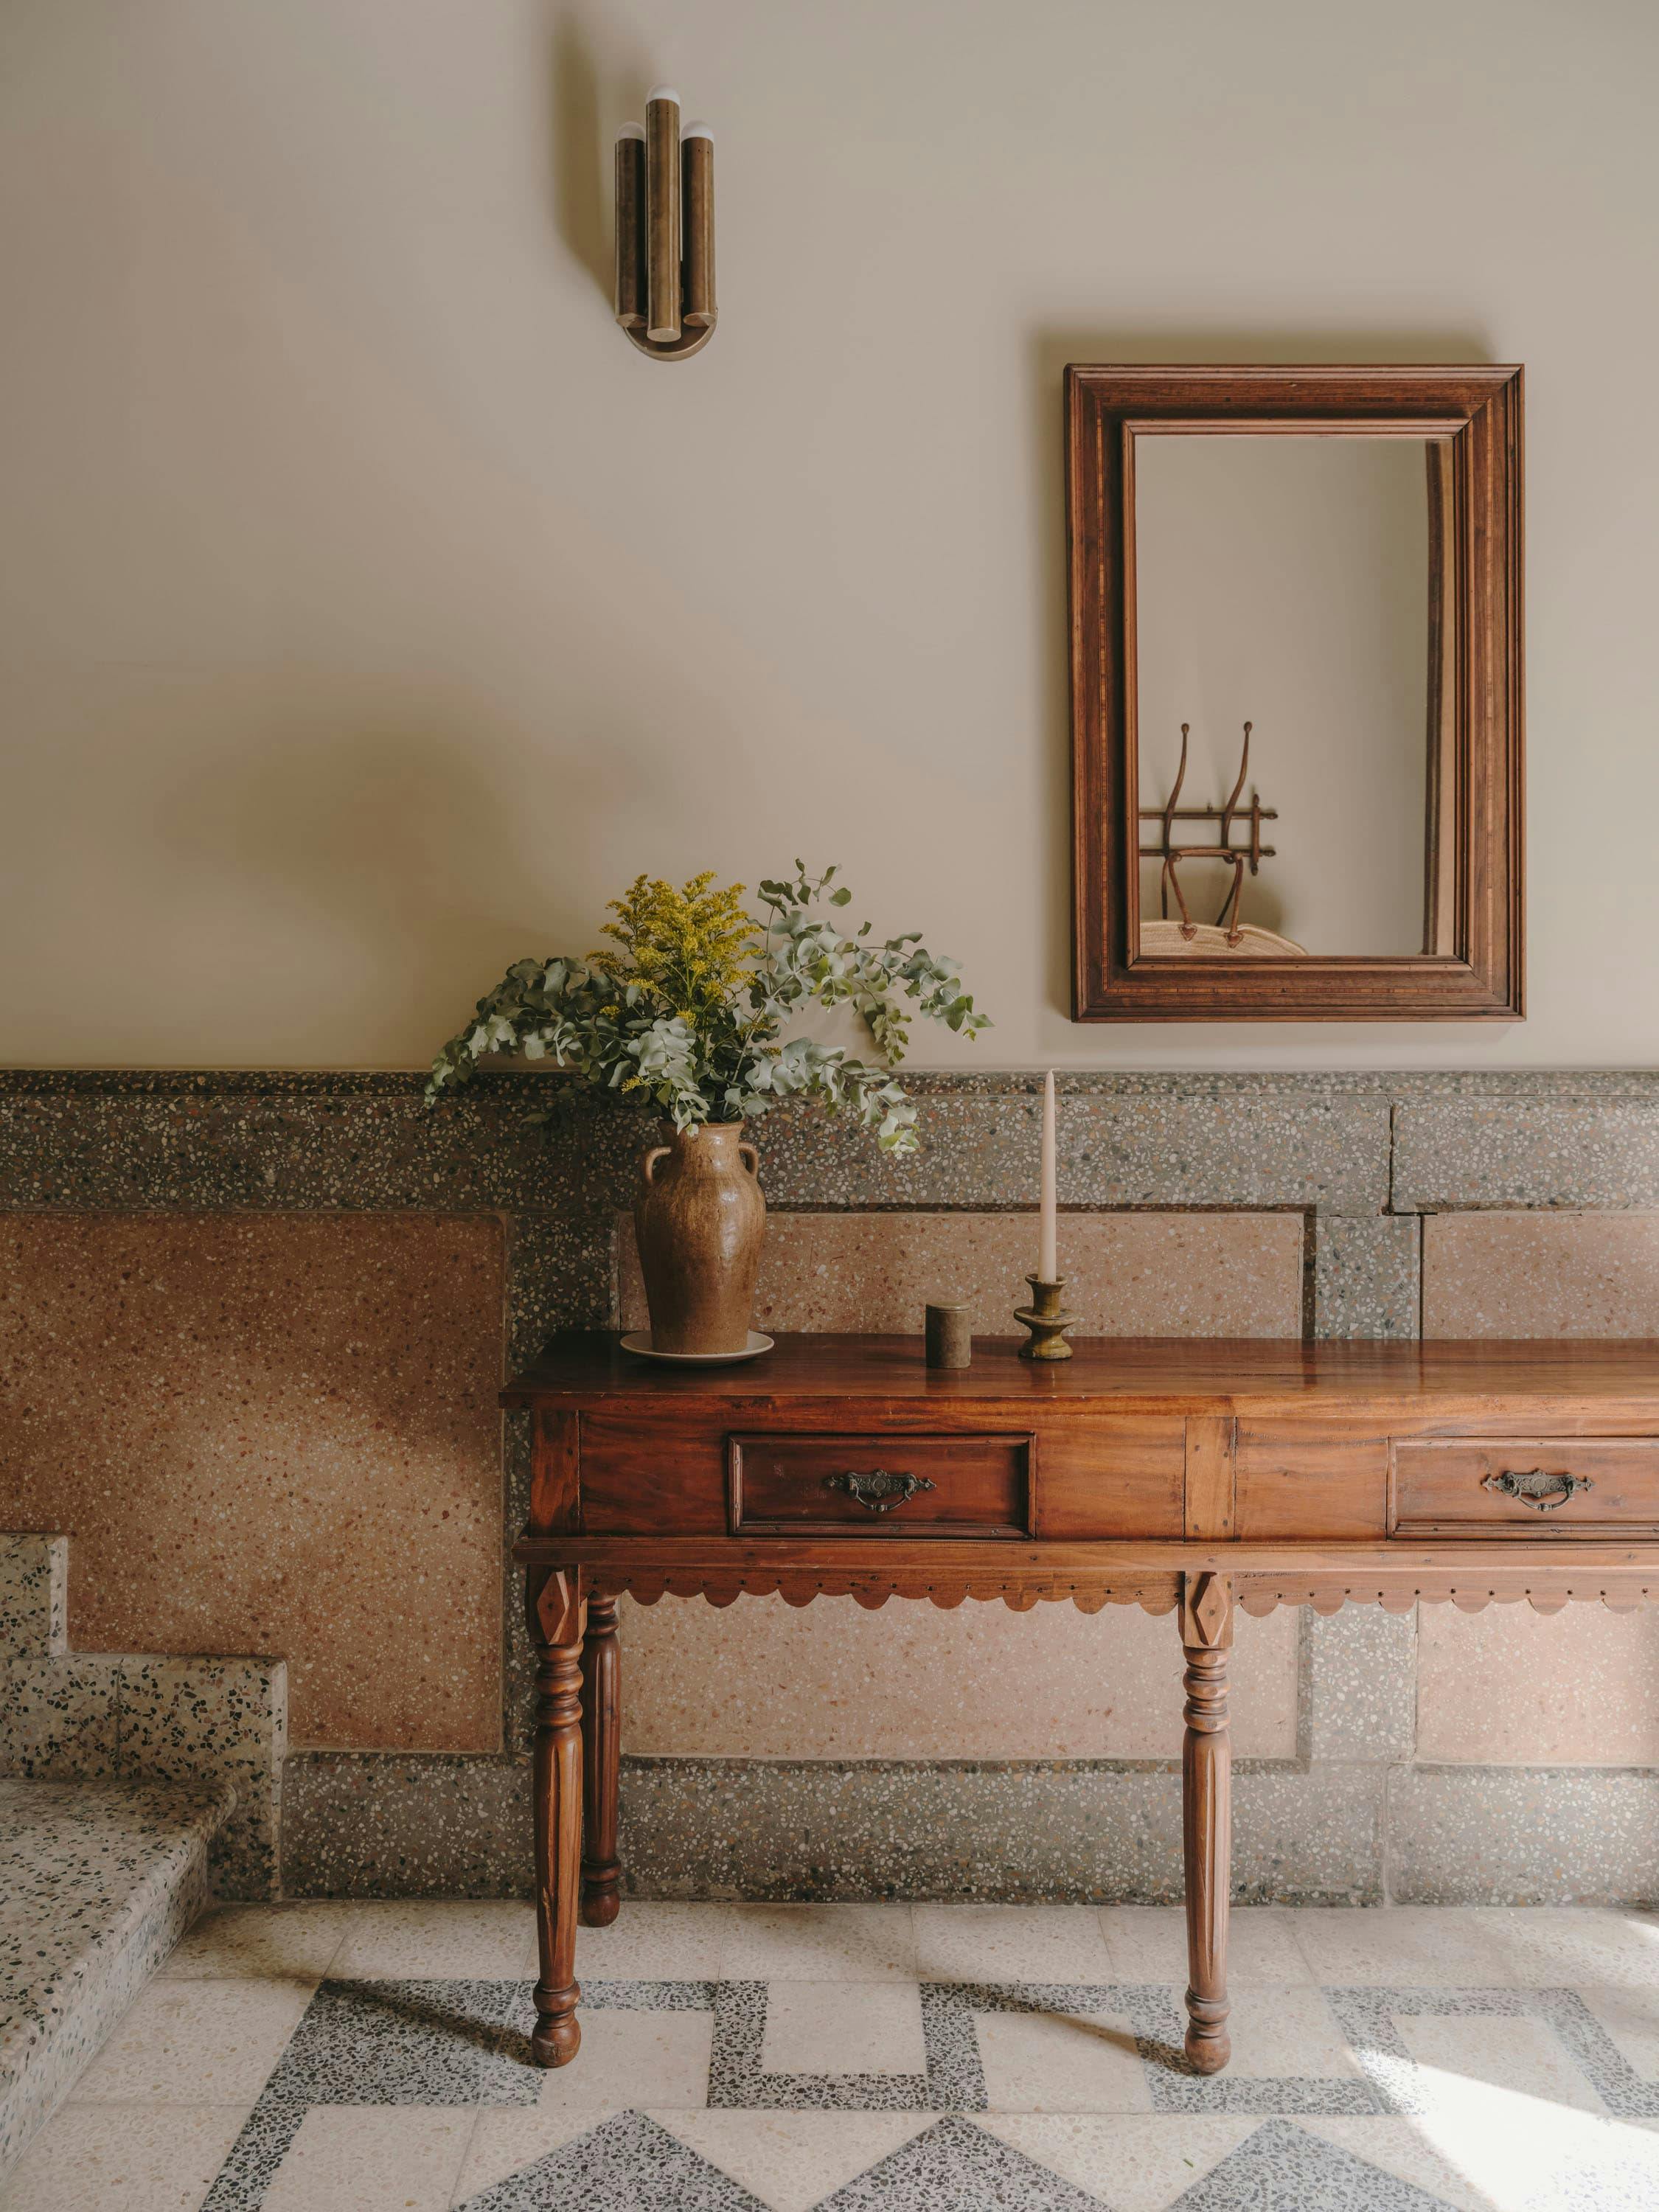 The image features a bathroom with a large mirror above a wooden vanity. The vanity is adorned with a vase of flowers, adding a touch of elegance to the space. The bathroom also has a wooden cabinet and a wooden bench. The room is well-lit, creating a warm and inviting atmosphere.

In addition to the main vanity, there is a smaller vanity located on the left side of the room. The bathroom appears to be clean and well-maintained, with a well-organized layout.